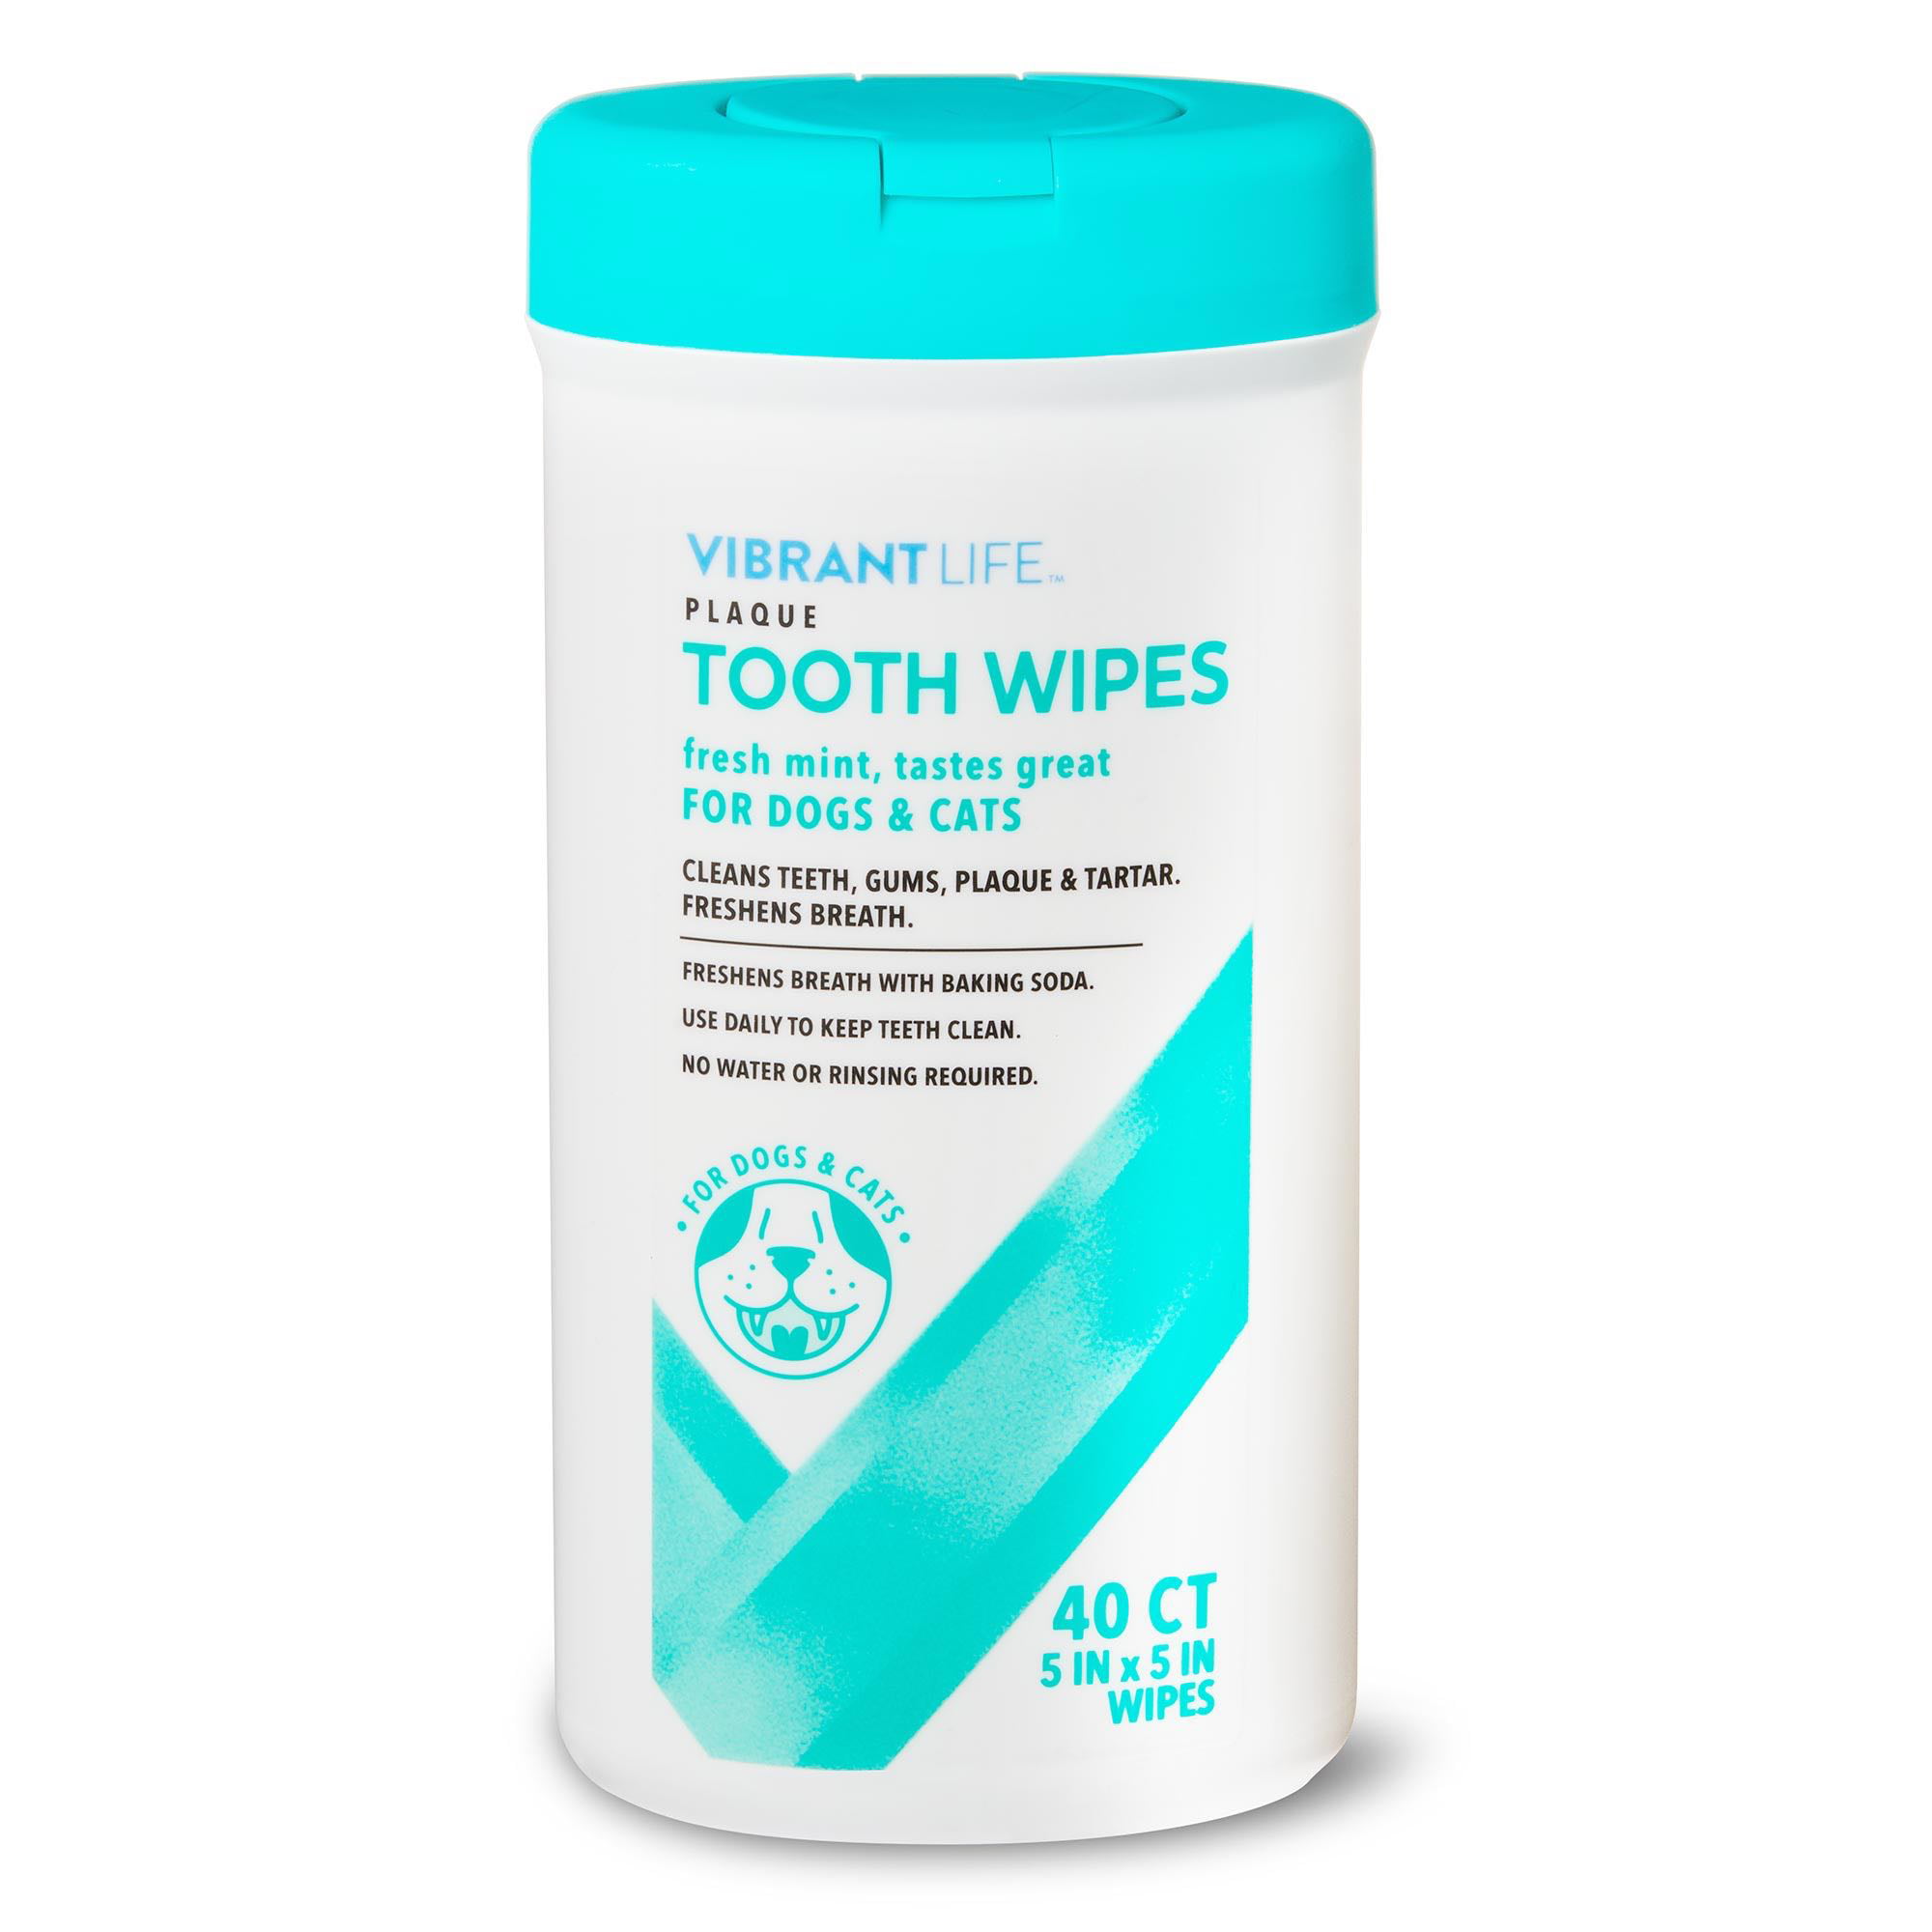 plaque tooth wipes for dogs